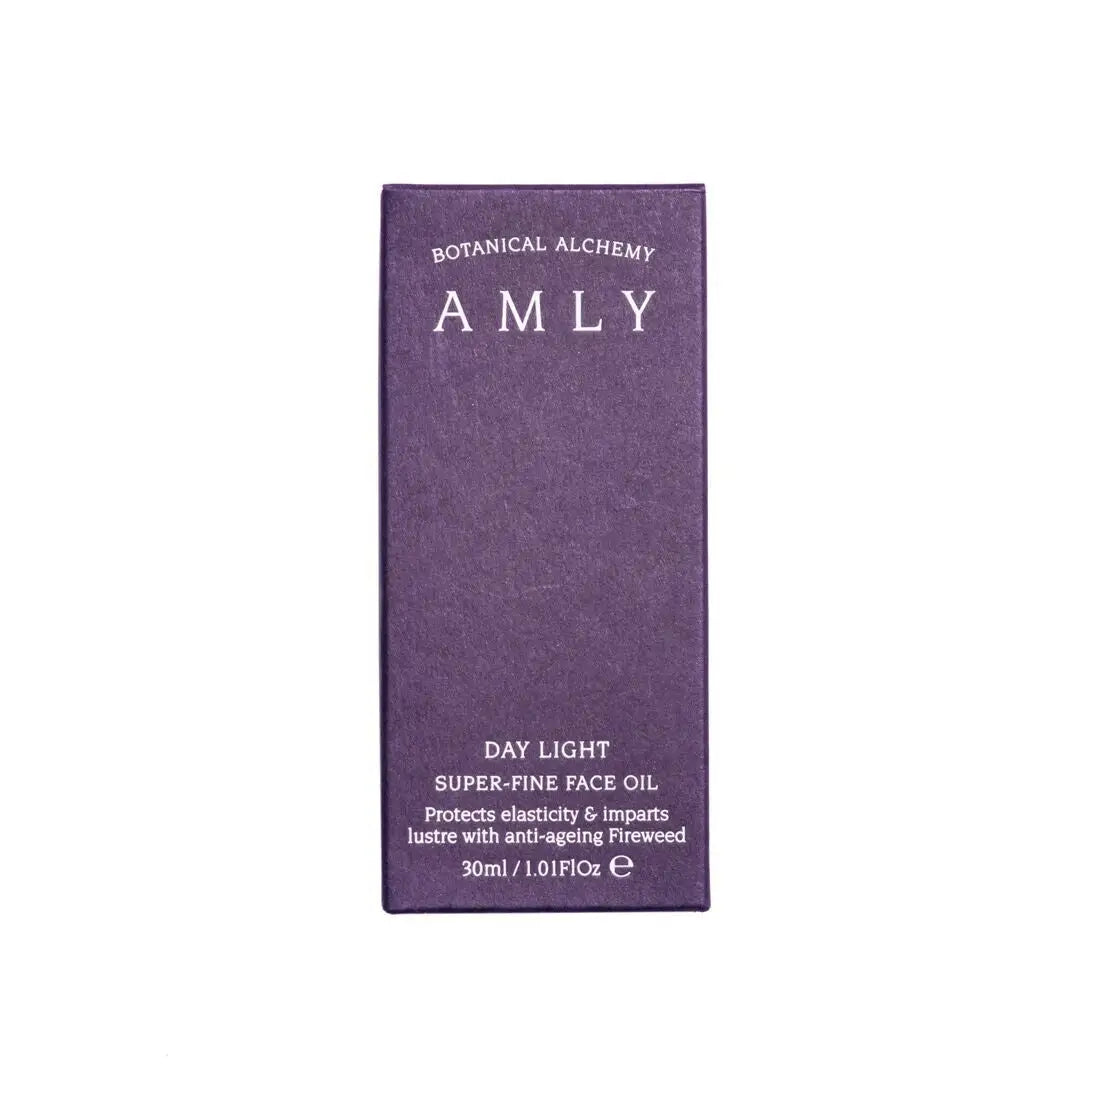 Amly Day Light Face Oil 30ml - Free Shipping Worldwide